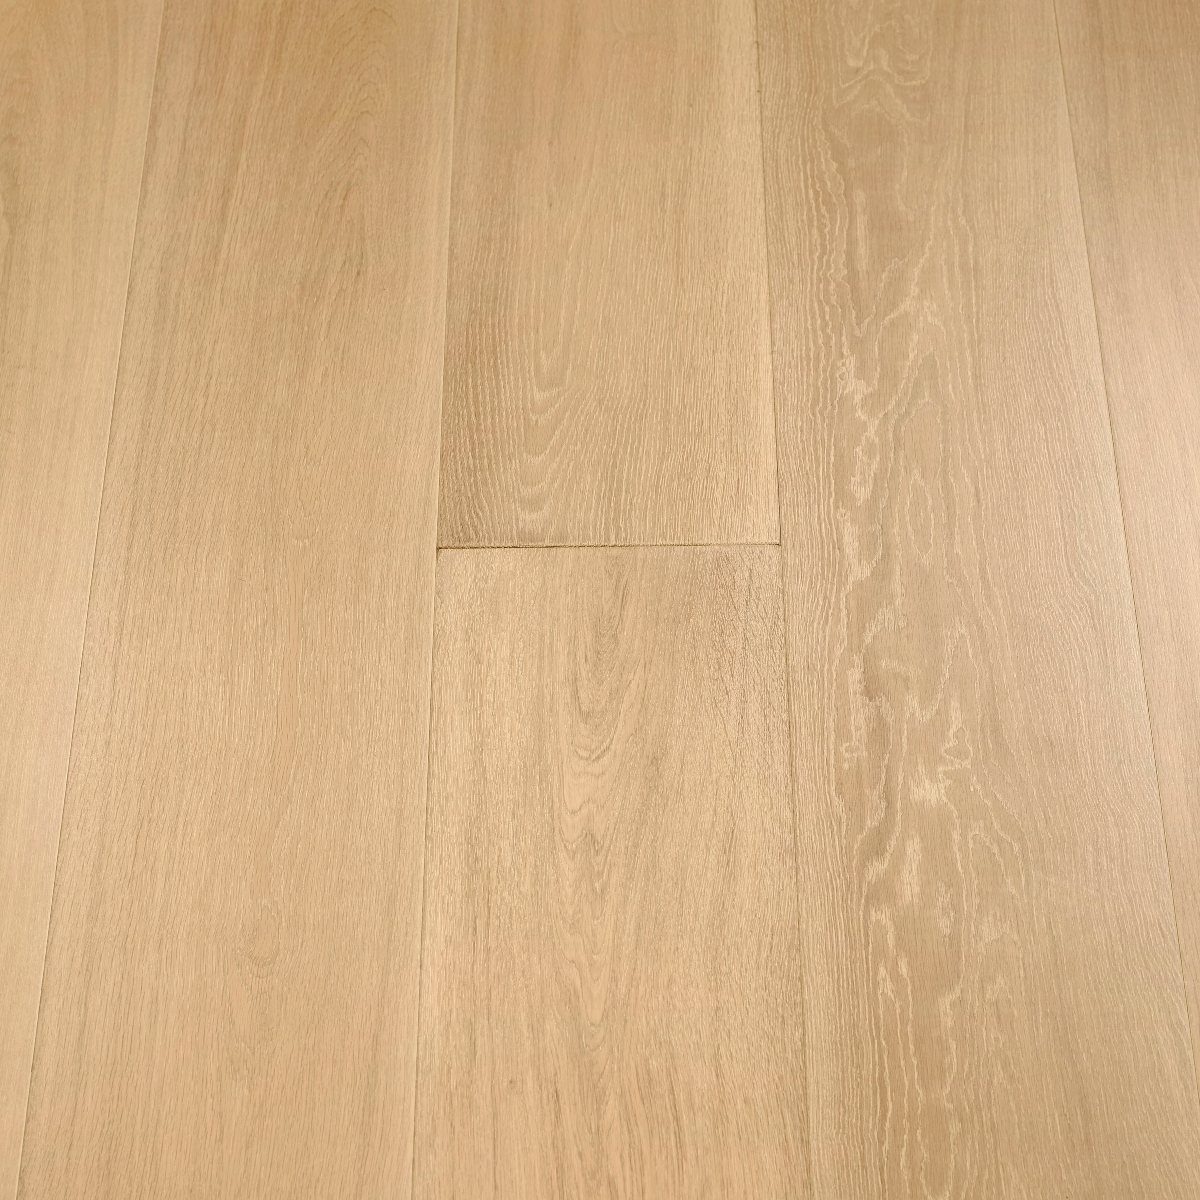 Select Shandy Woodflooring - image presenting Select Shandy wood flooring with warm and inviting tones, creating a cozy and comfortable atmosphere.